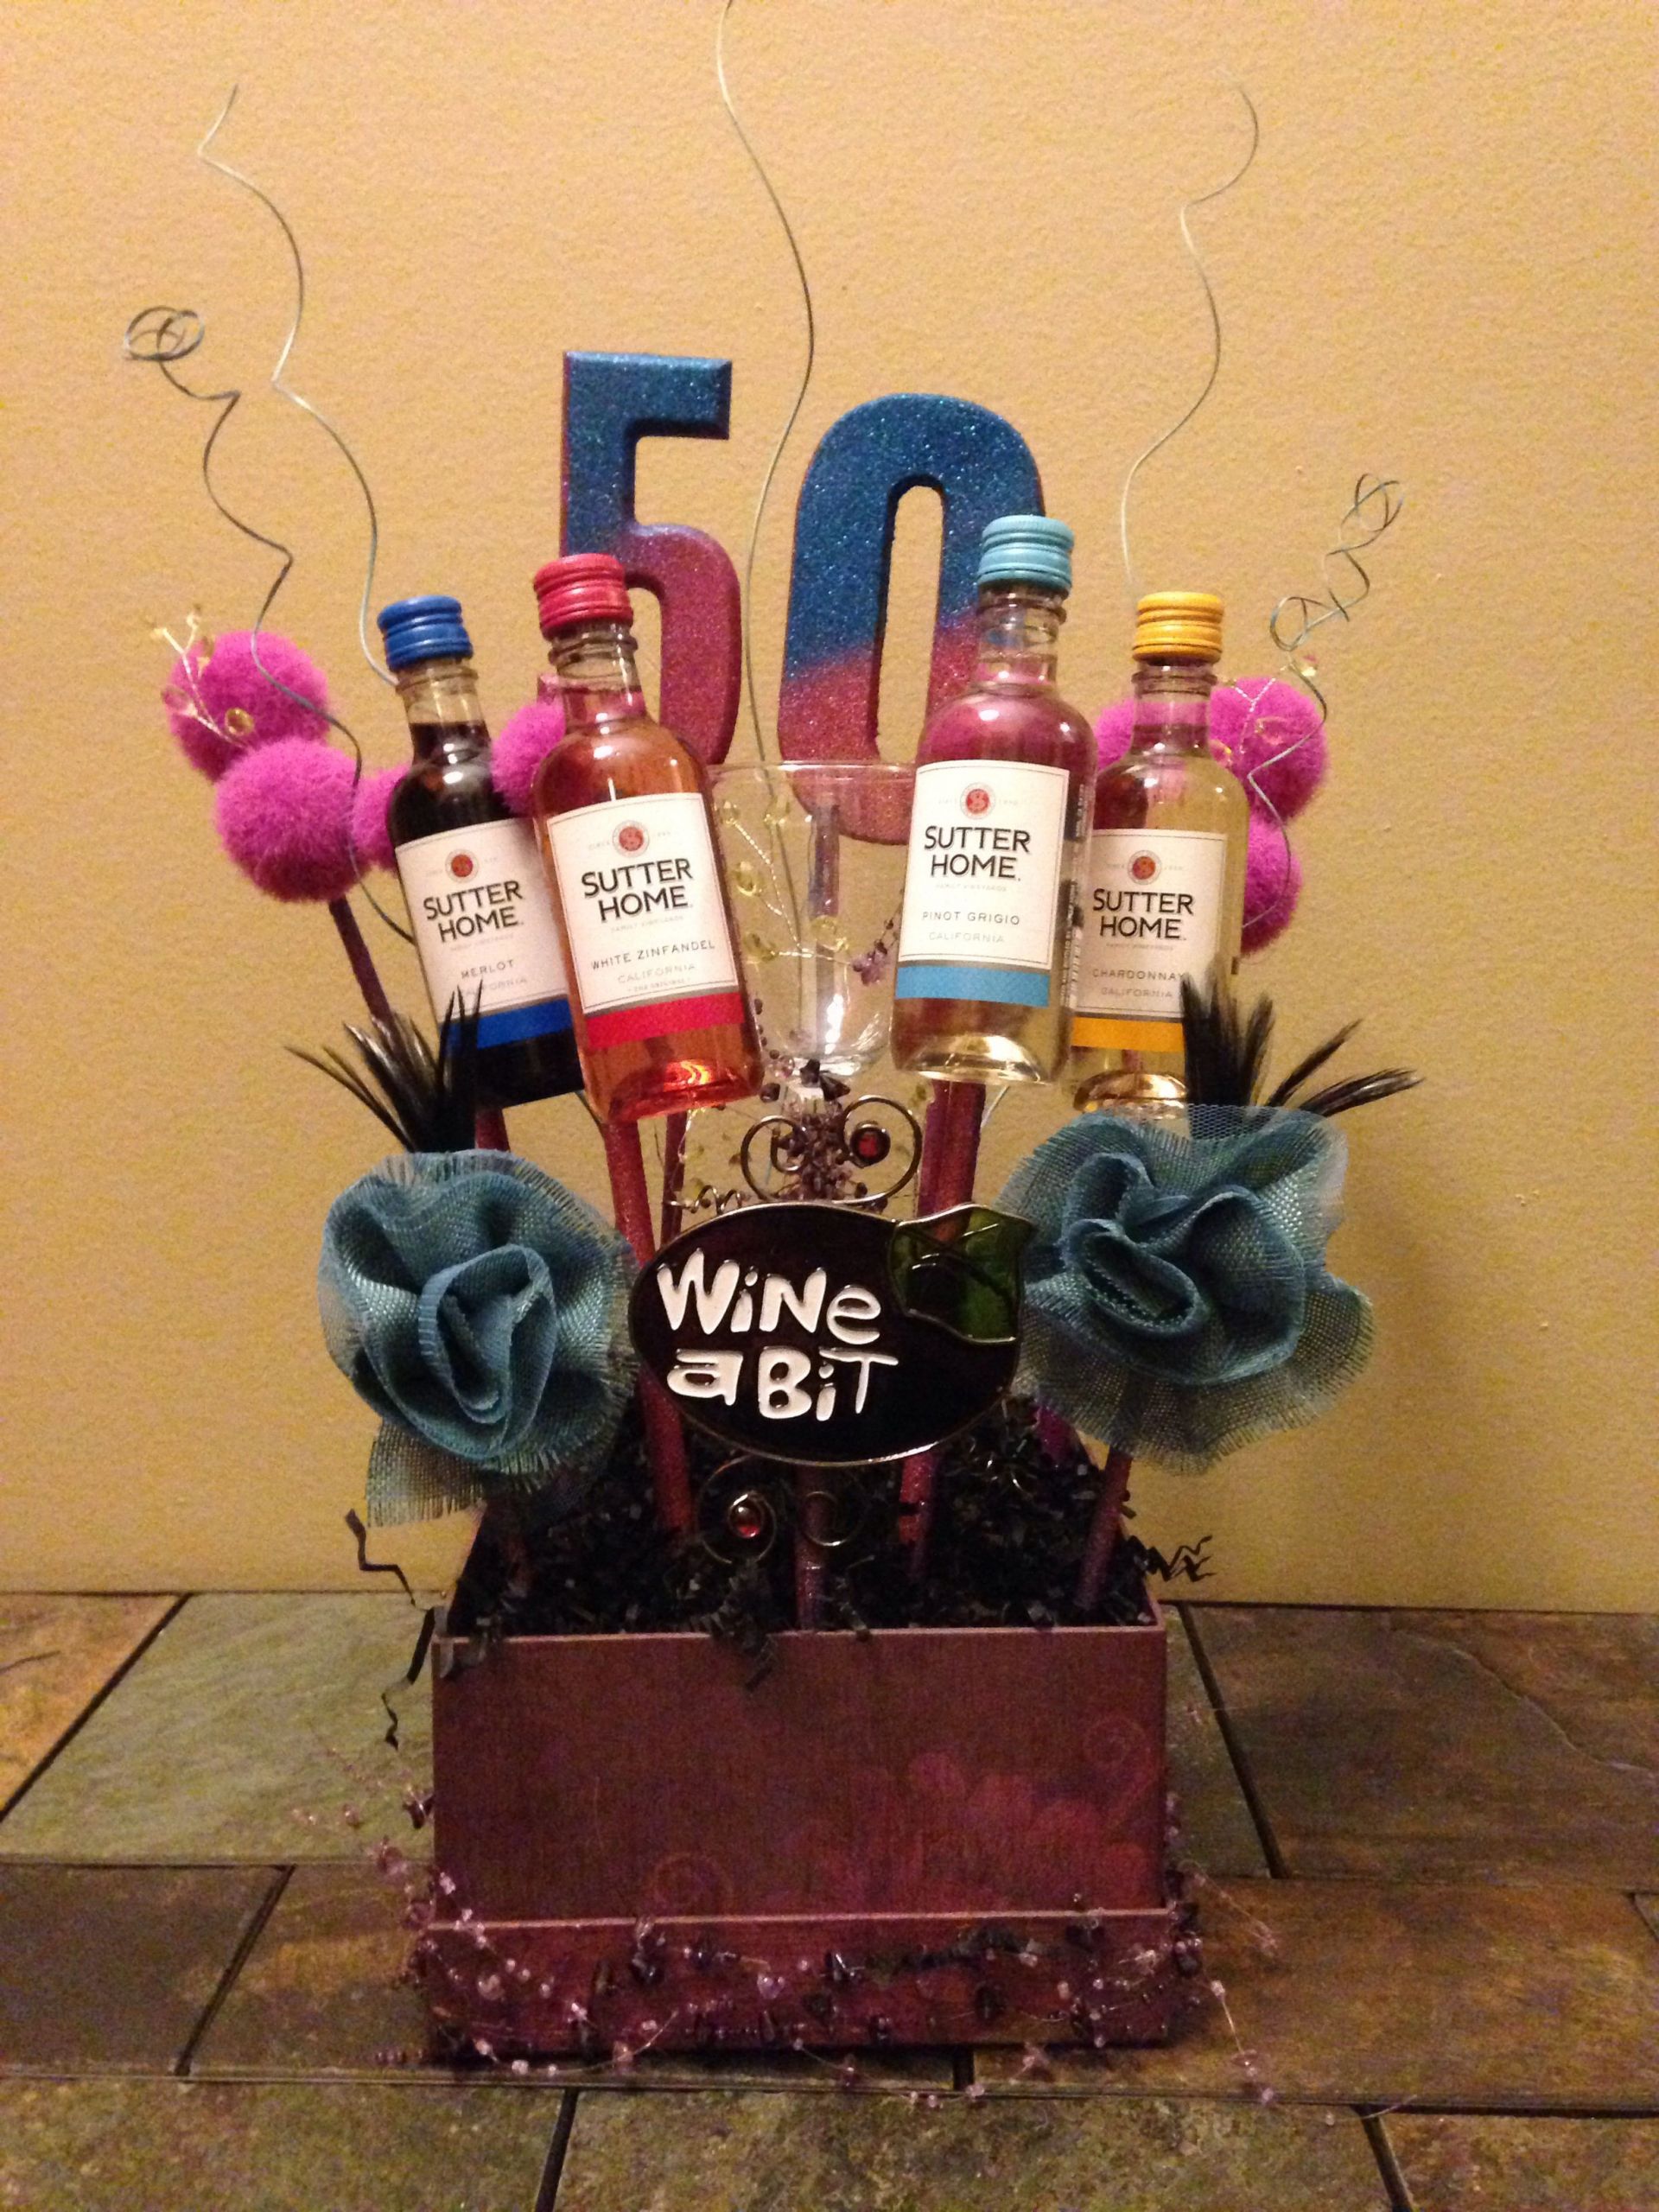 The Best Ideas for Funny 50th Birthday Gift Ideas Home, Family, Style